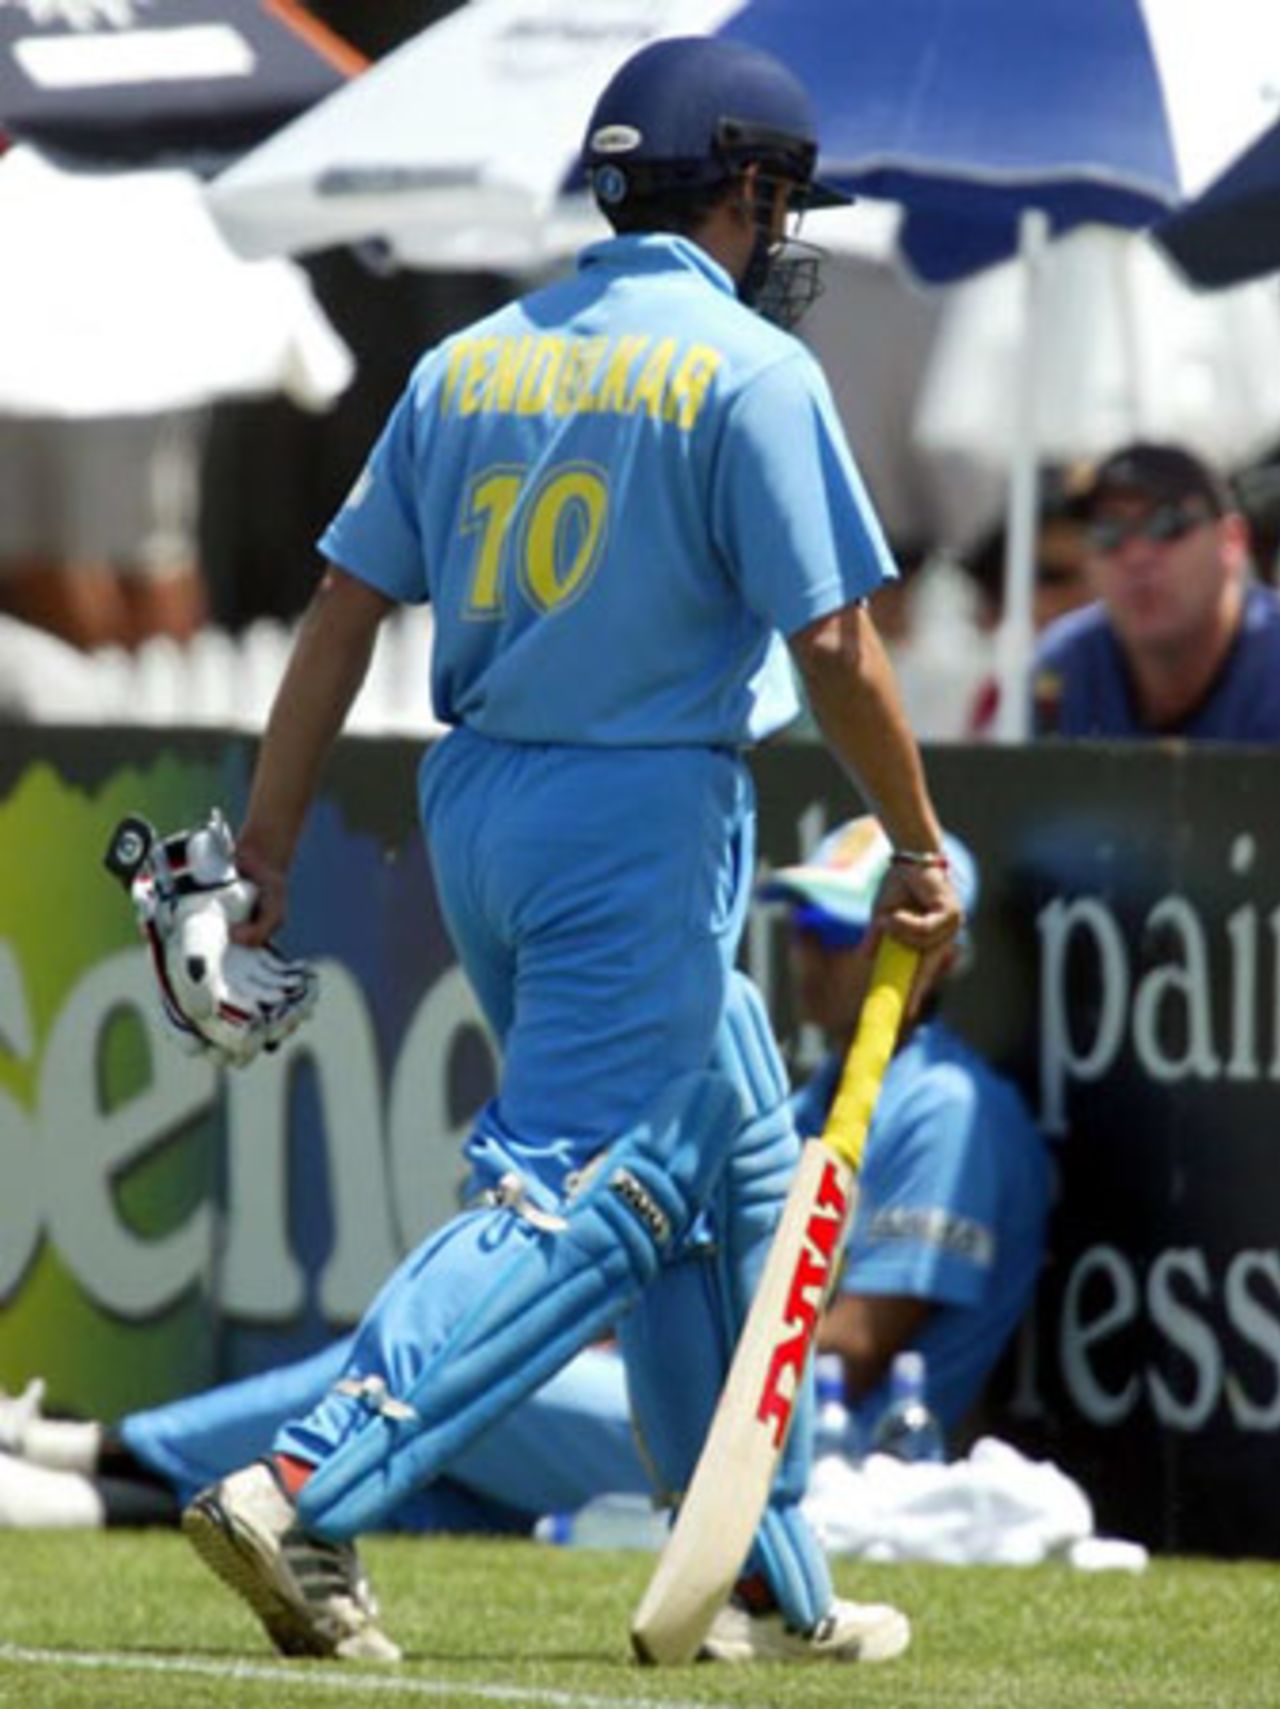 Indian batsman Sachin Tendulkar leaves the field after being dismissed, caught by New Zealand fielder Stephen Fleming at first slip off the bowling of Daryl Tuffey for one. 7th ODI: New Zealand v India at Westpac Park, Hamilton, 14 January 2003.